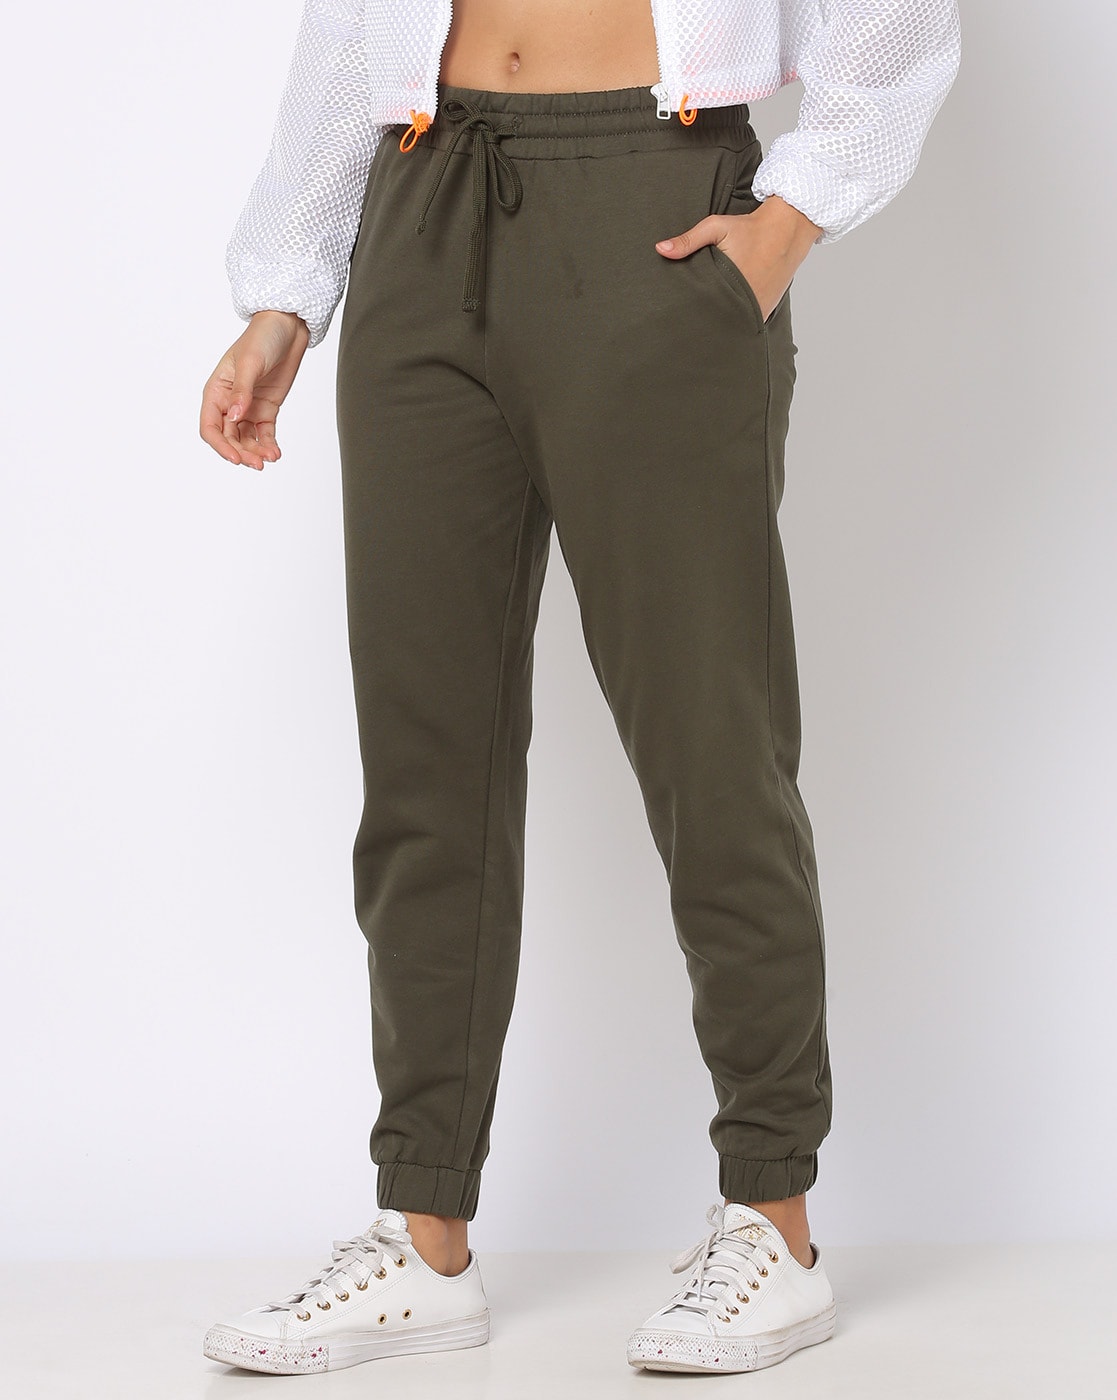 Women's Jogger Pants | Leather, Camo & Army Trousers